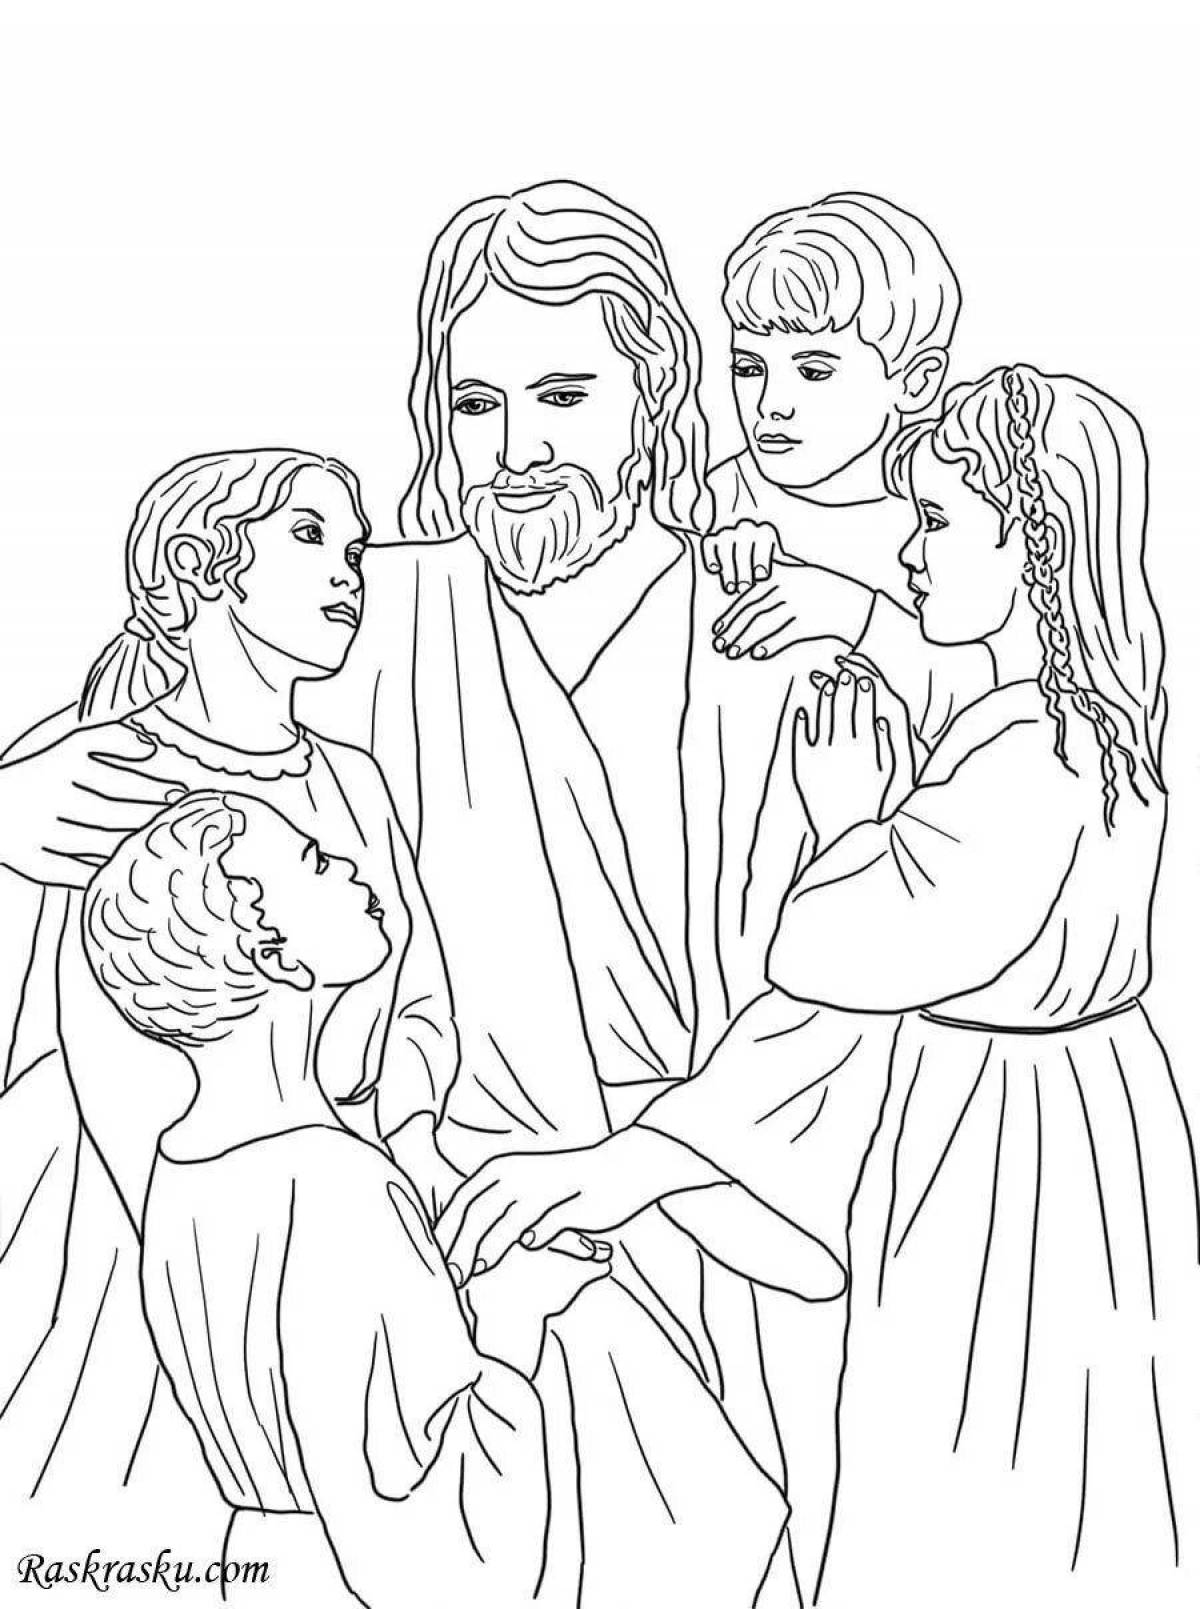 Coloring page resplendent jesus